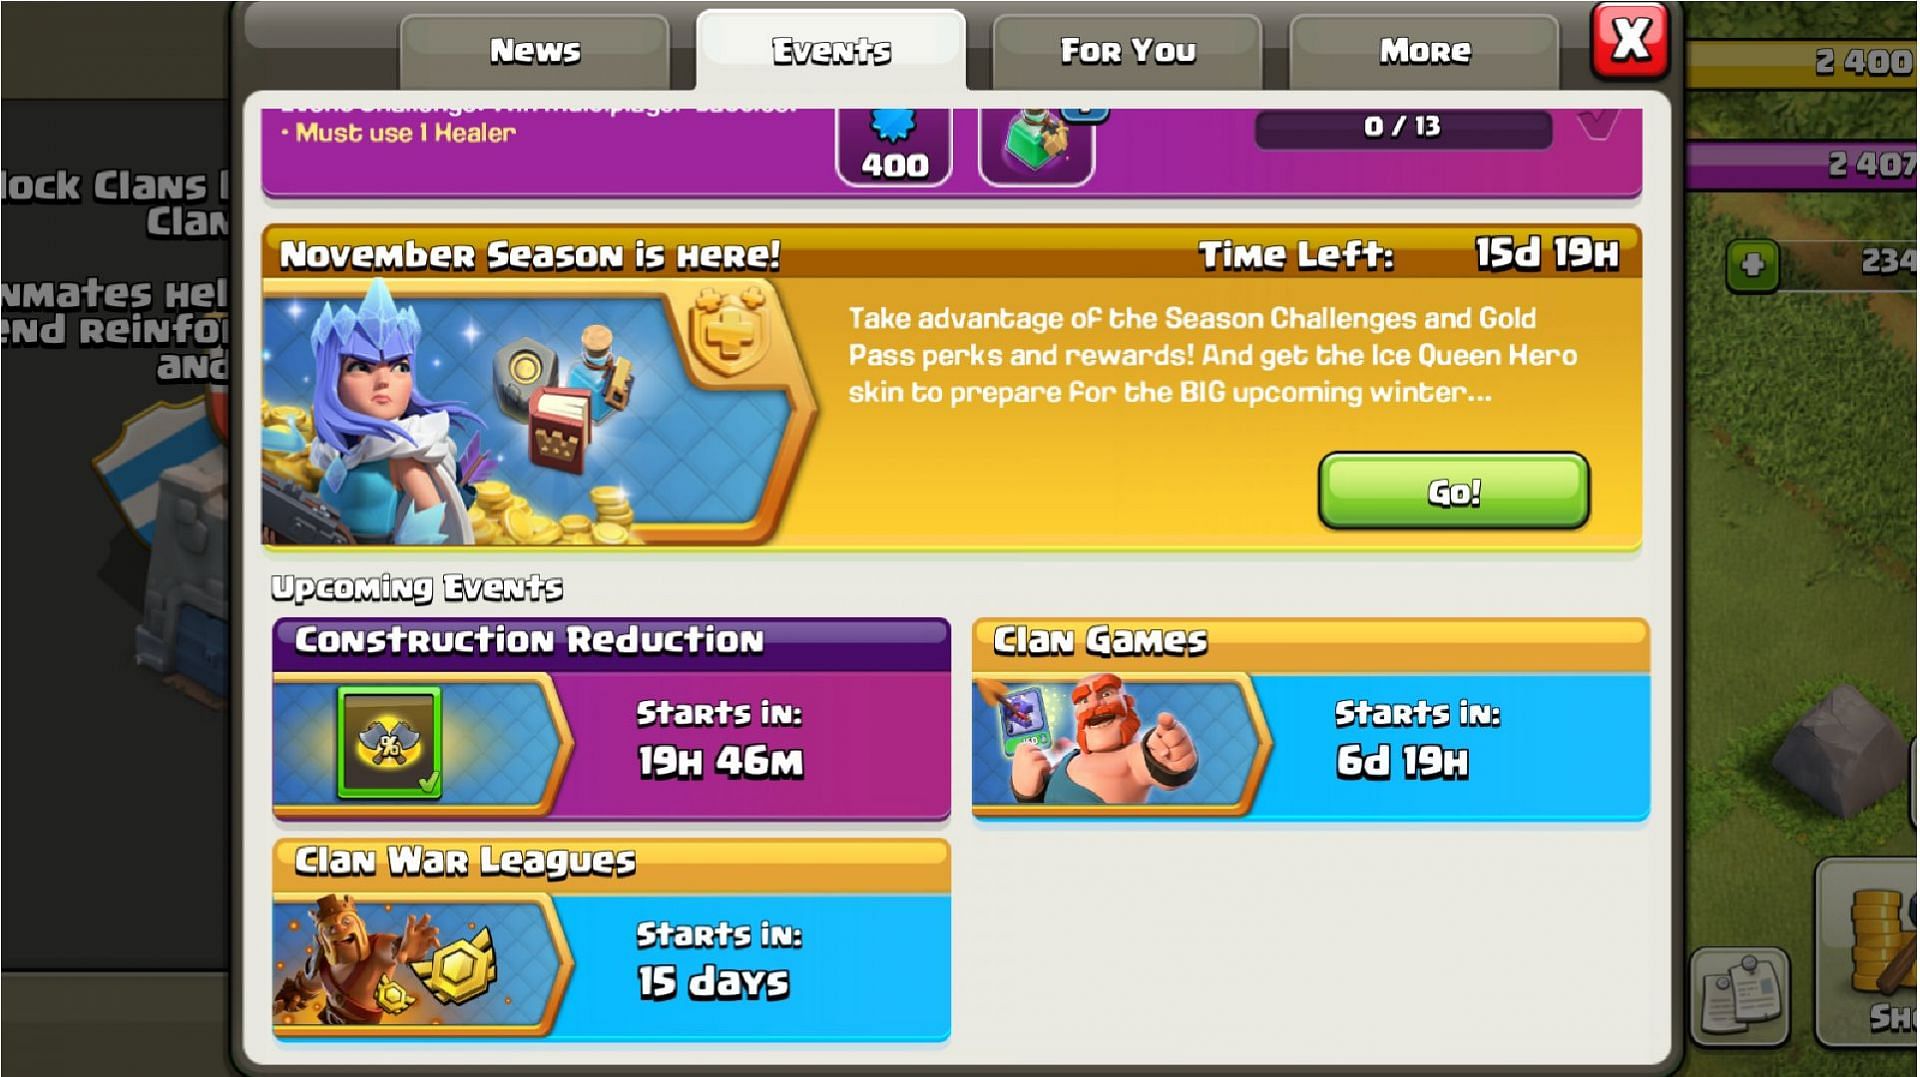 Complete events for free rewards (Image via Supercell)